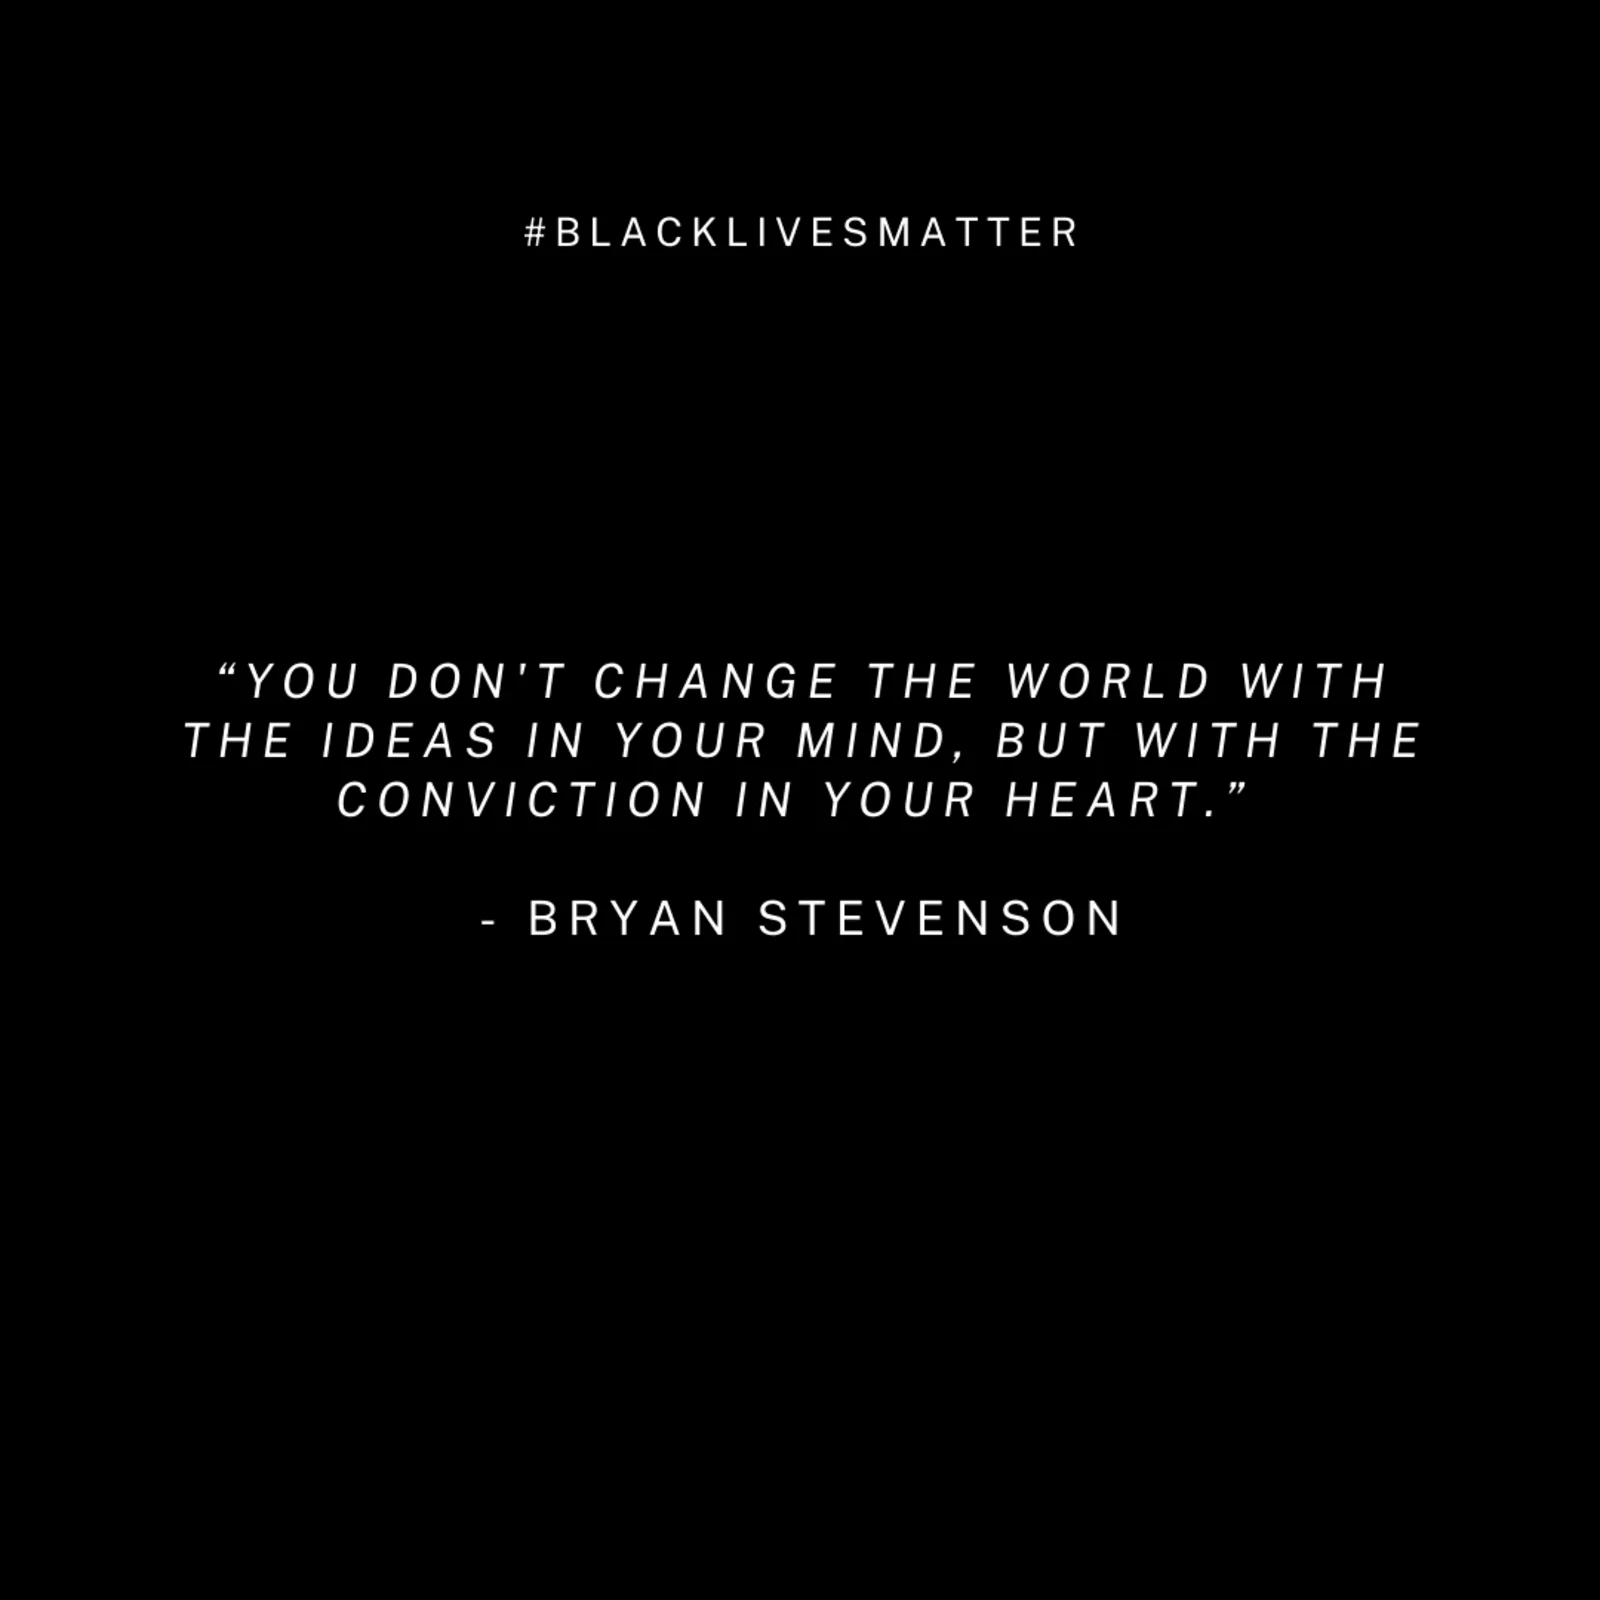 Bryan Stevenson quote: "You don't change the world with the ideas in your mind, but with the conviction in your heart"